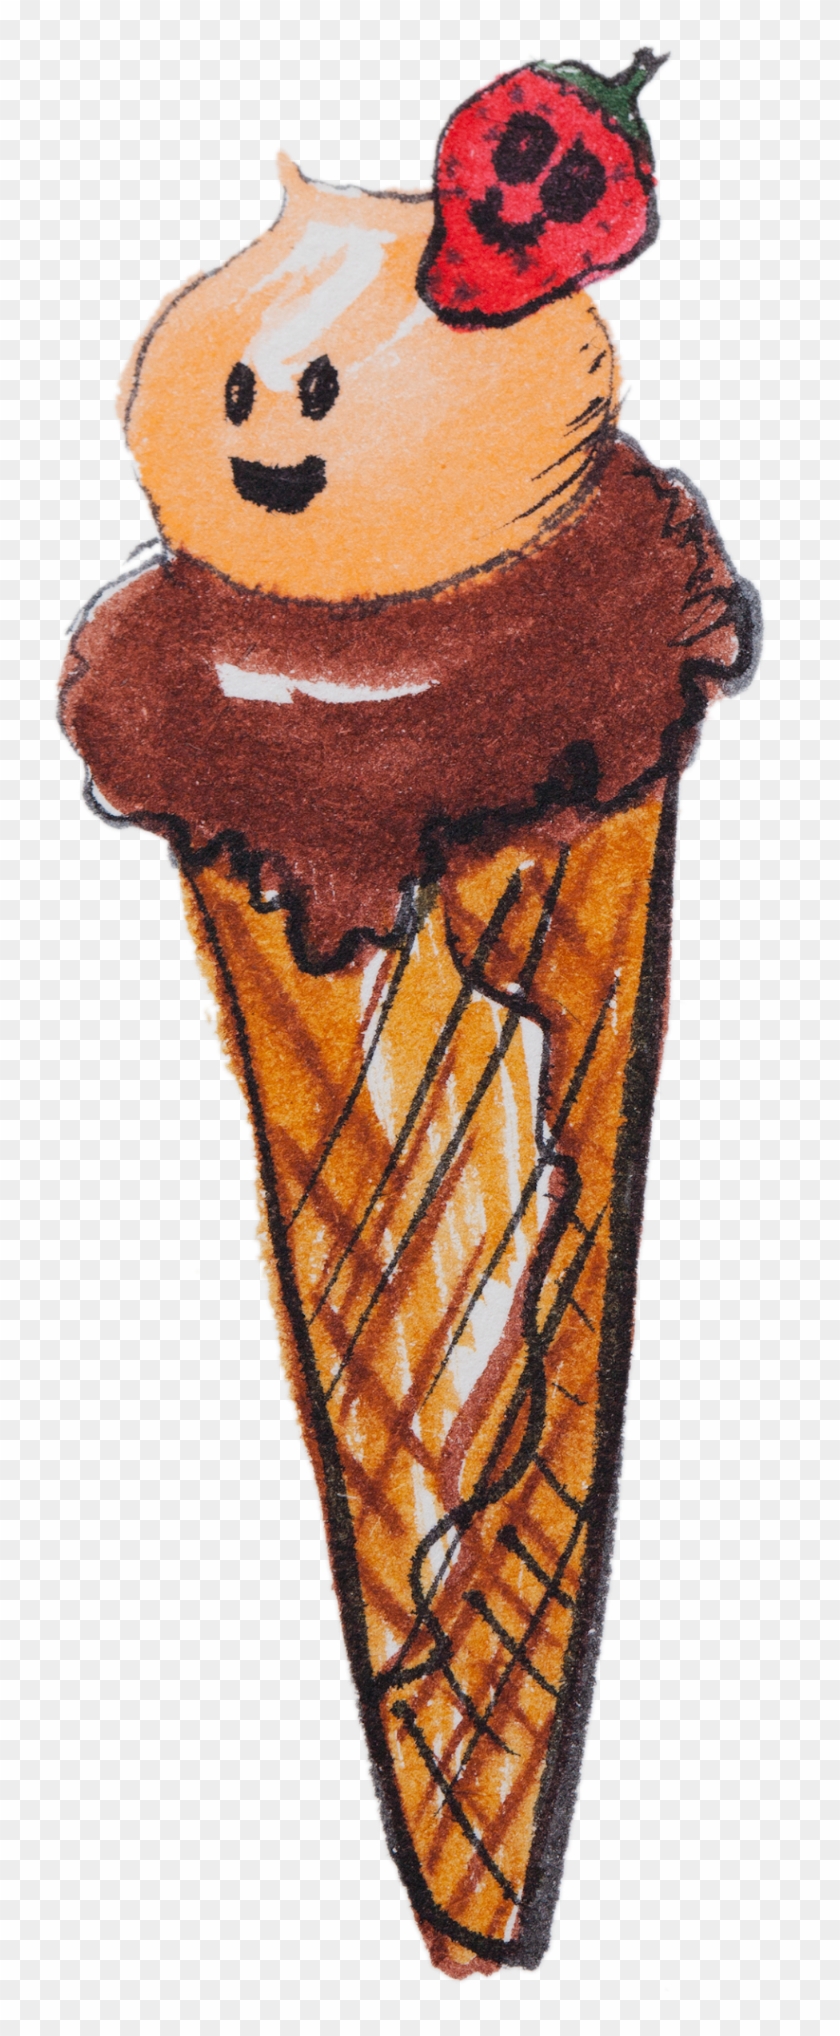 How About A Scoop Of All Three Flavors In One Awesome - Ice Cream Cone Clipart #842508